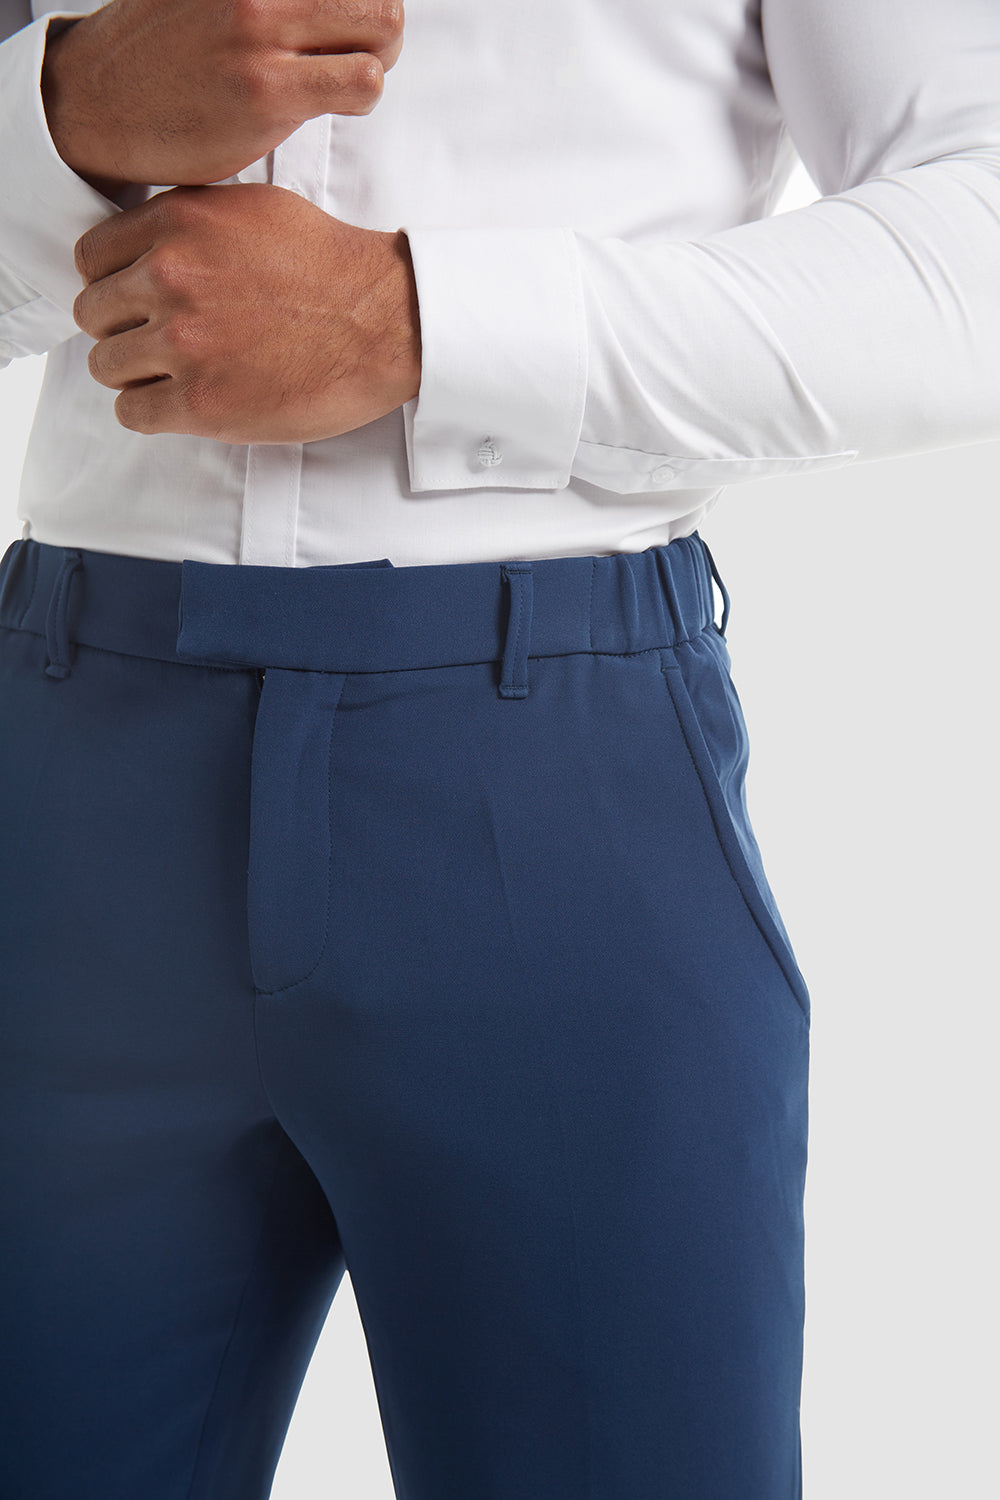 Buy Regular Fit Men Trousers Royal Blue Poly Cotton Blend for Best Price,  Reviews, Free Shipping